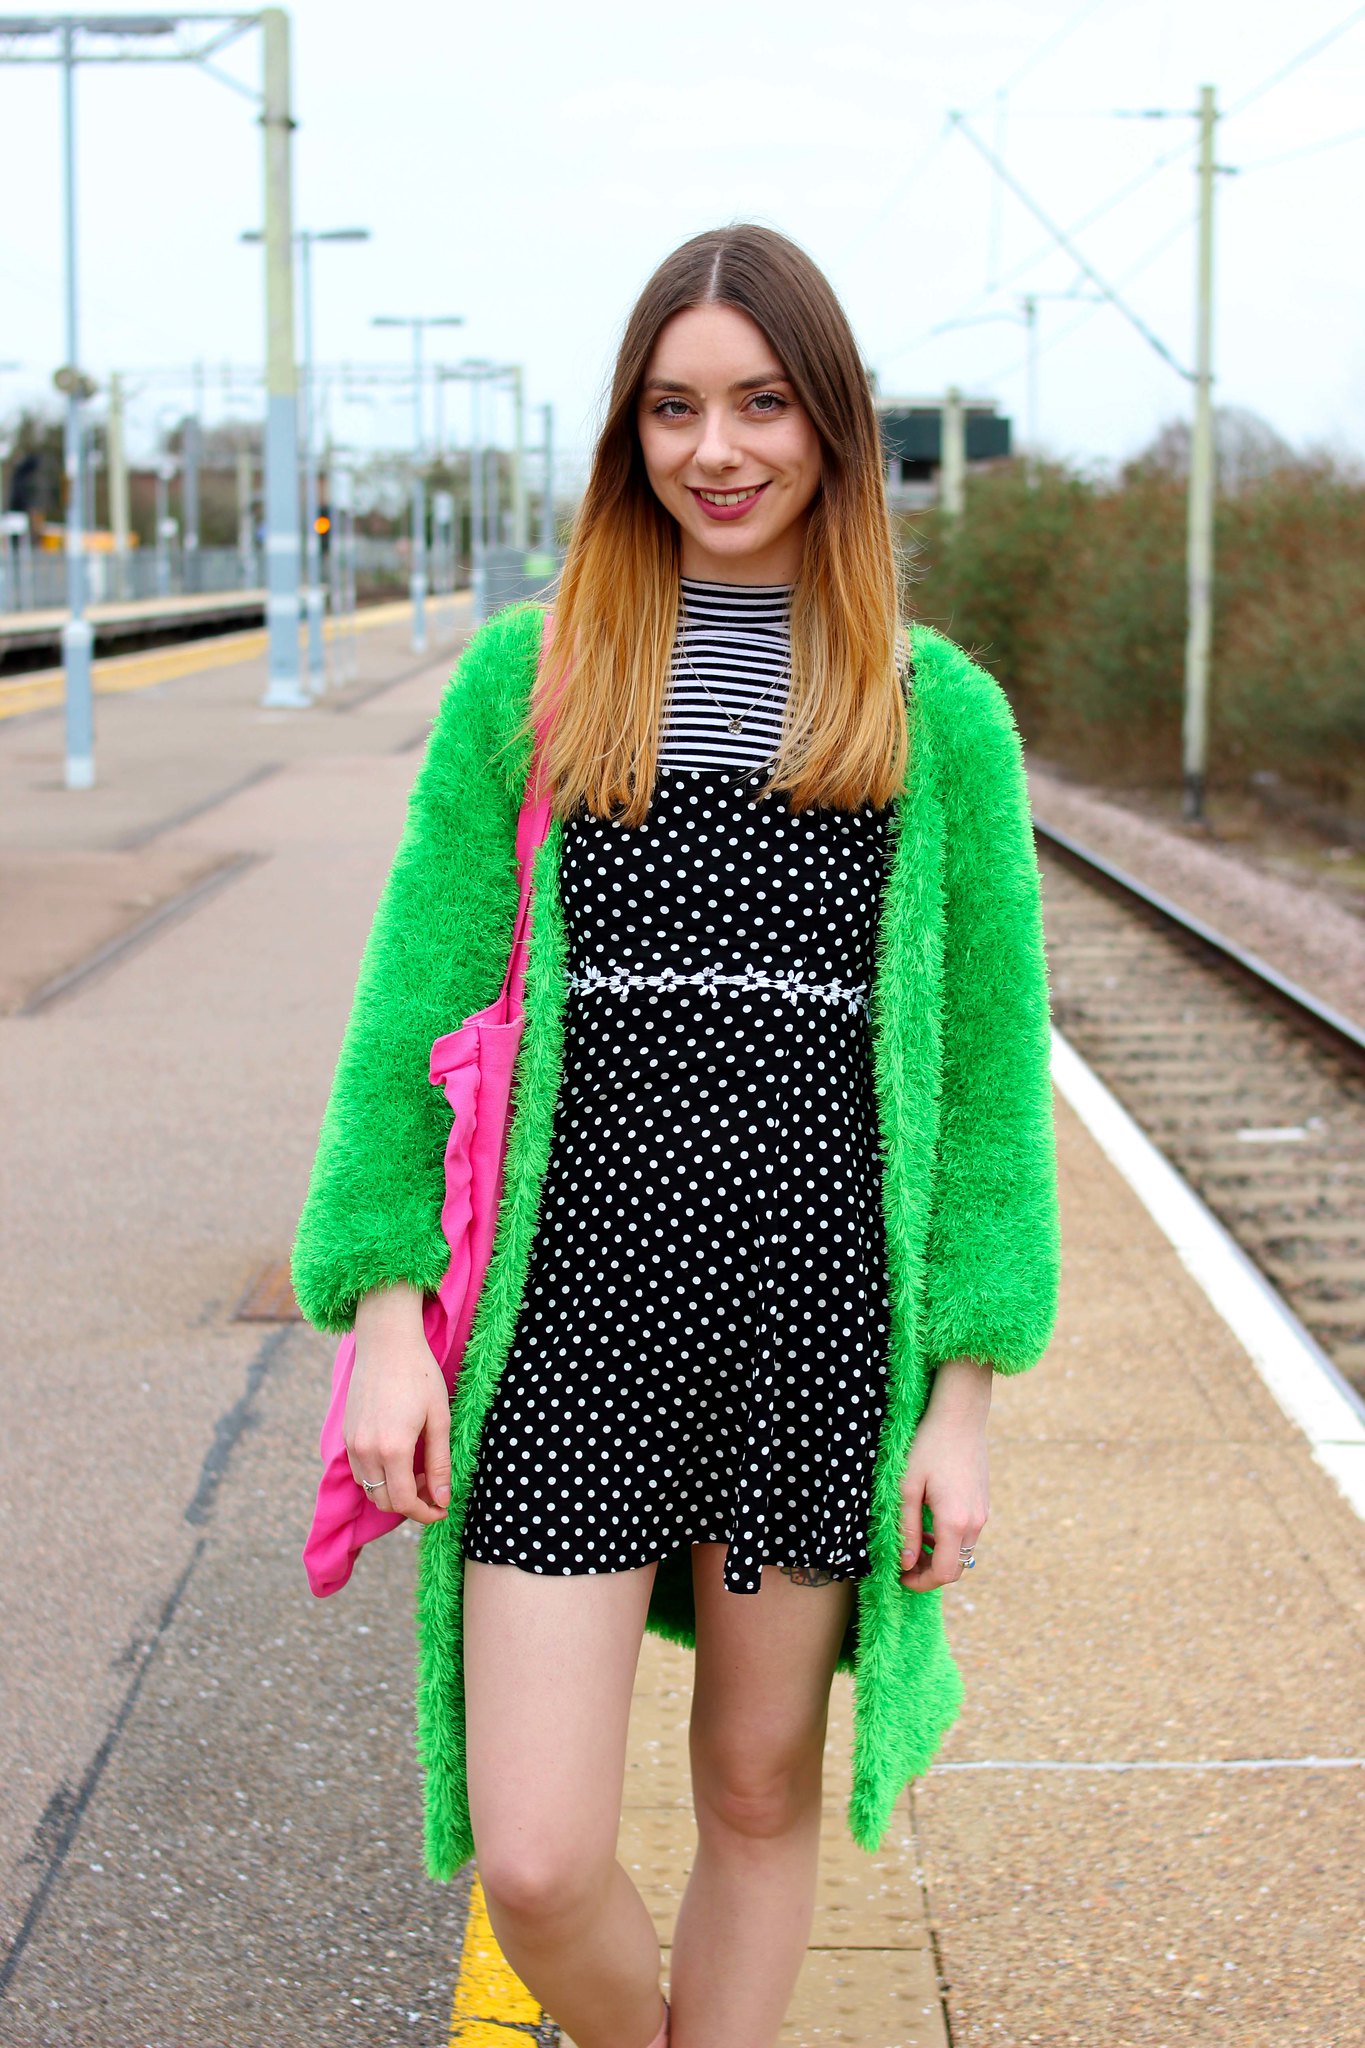 Clashing spots and stripes with a bright green cardigan